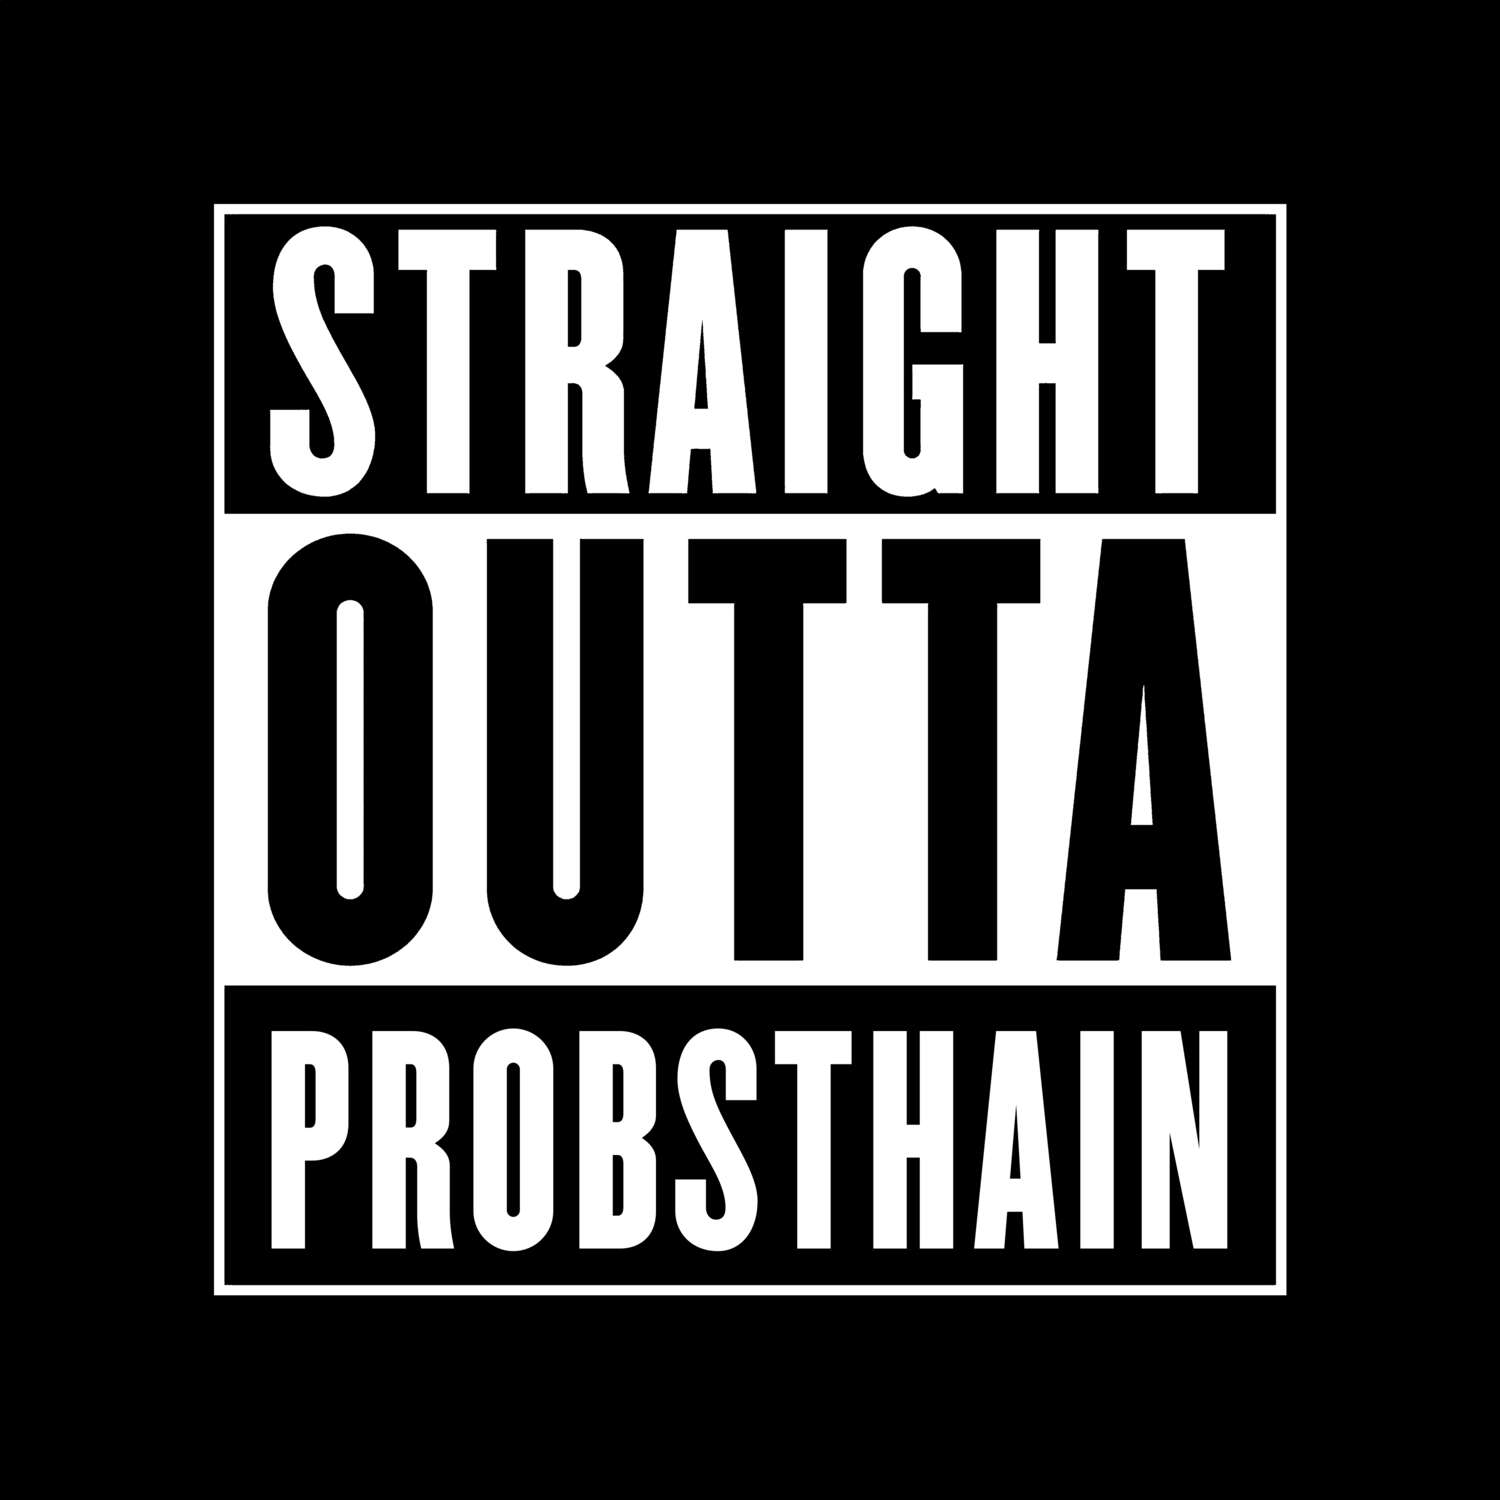 Probsthain T-Shirt »Straight Outta«